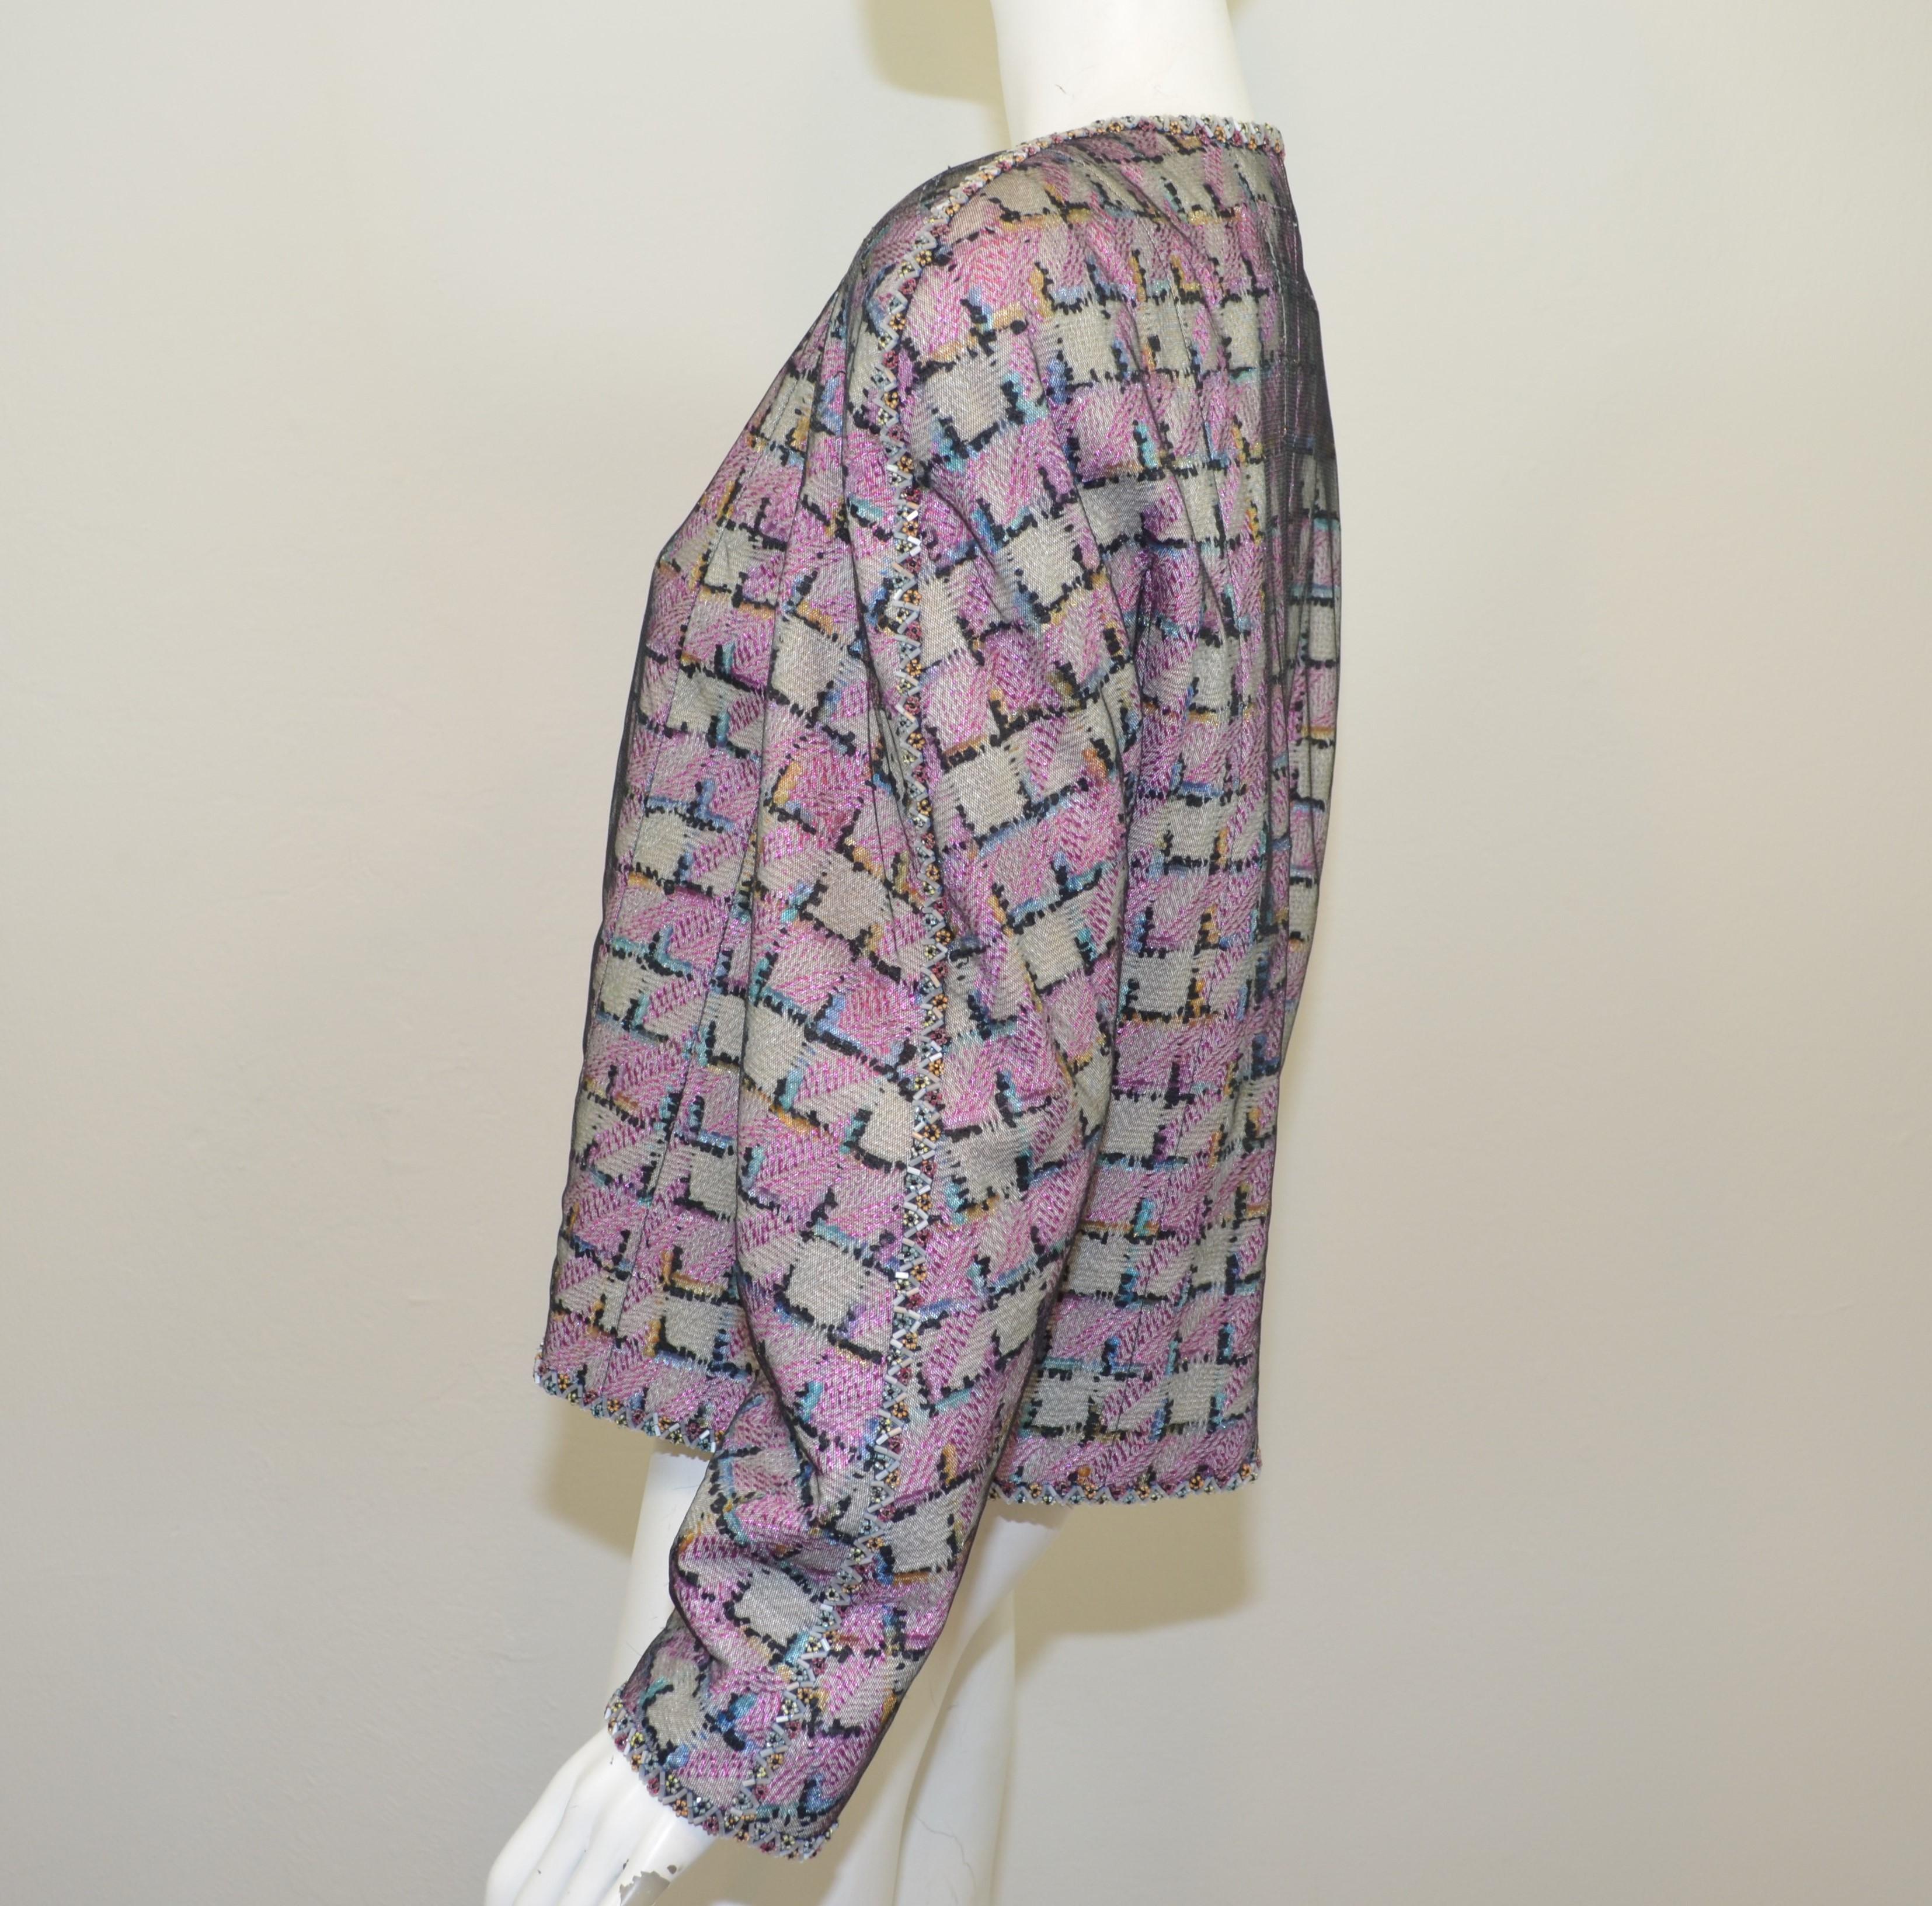 Women's 1998 C Chanel Multicolor Embellished Jacket with Mesh Overlay For Sale